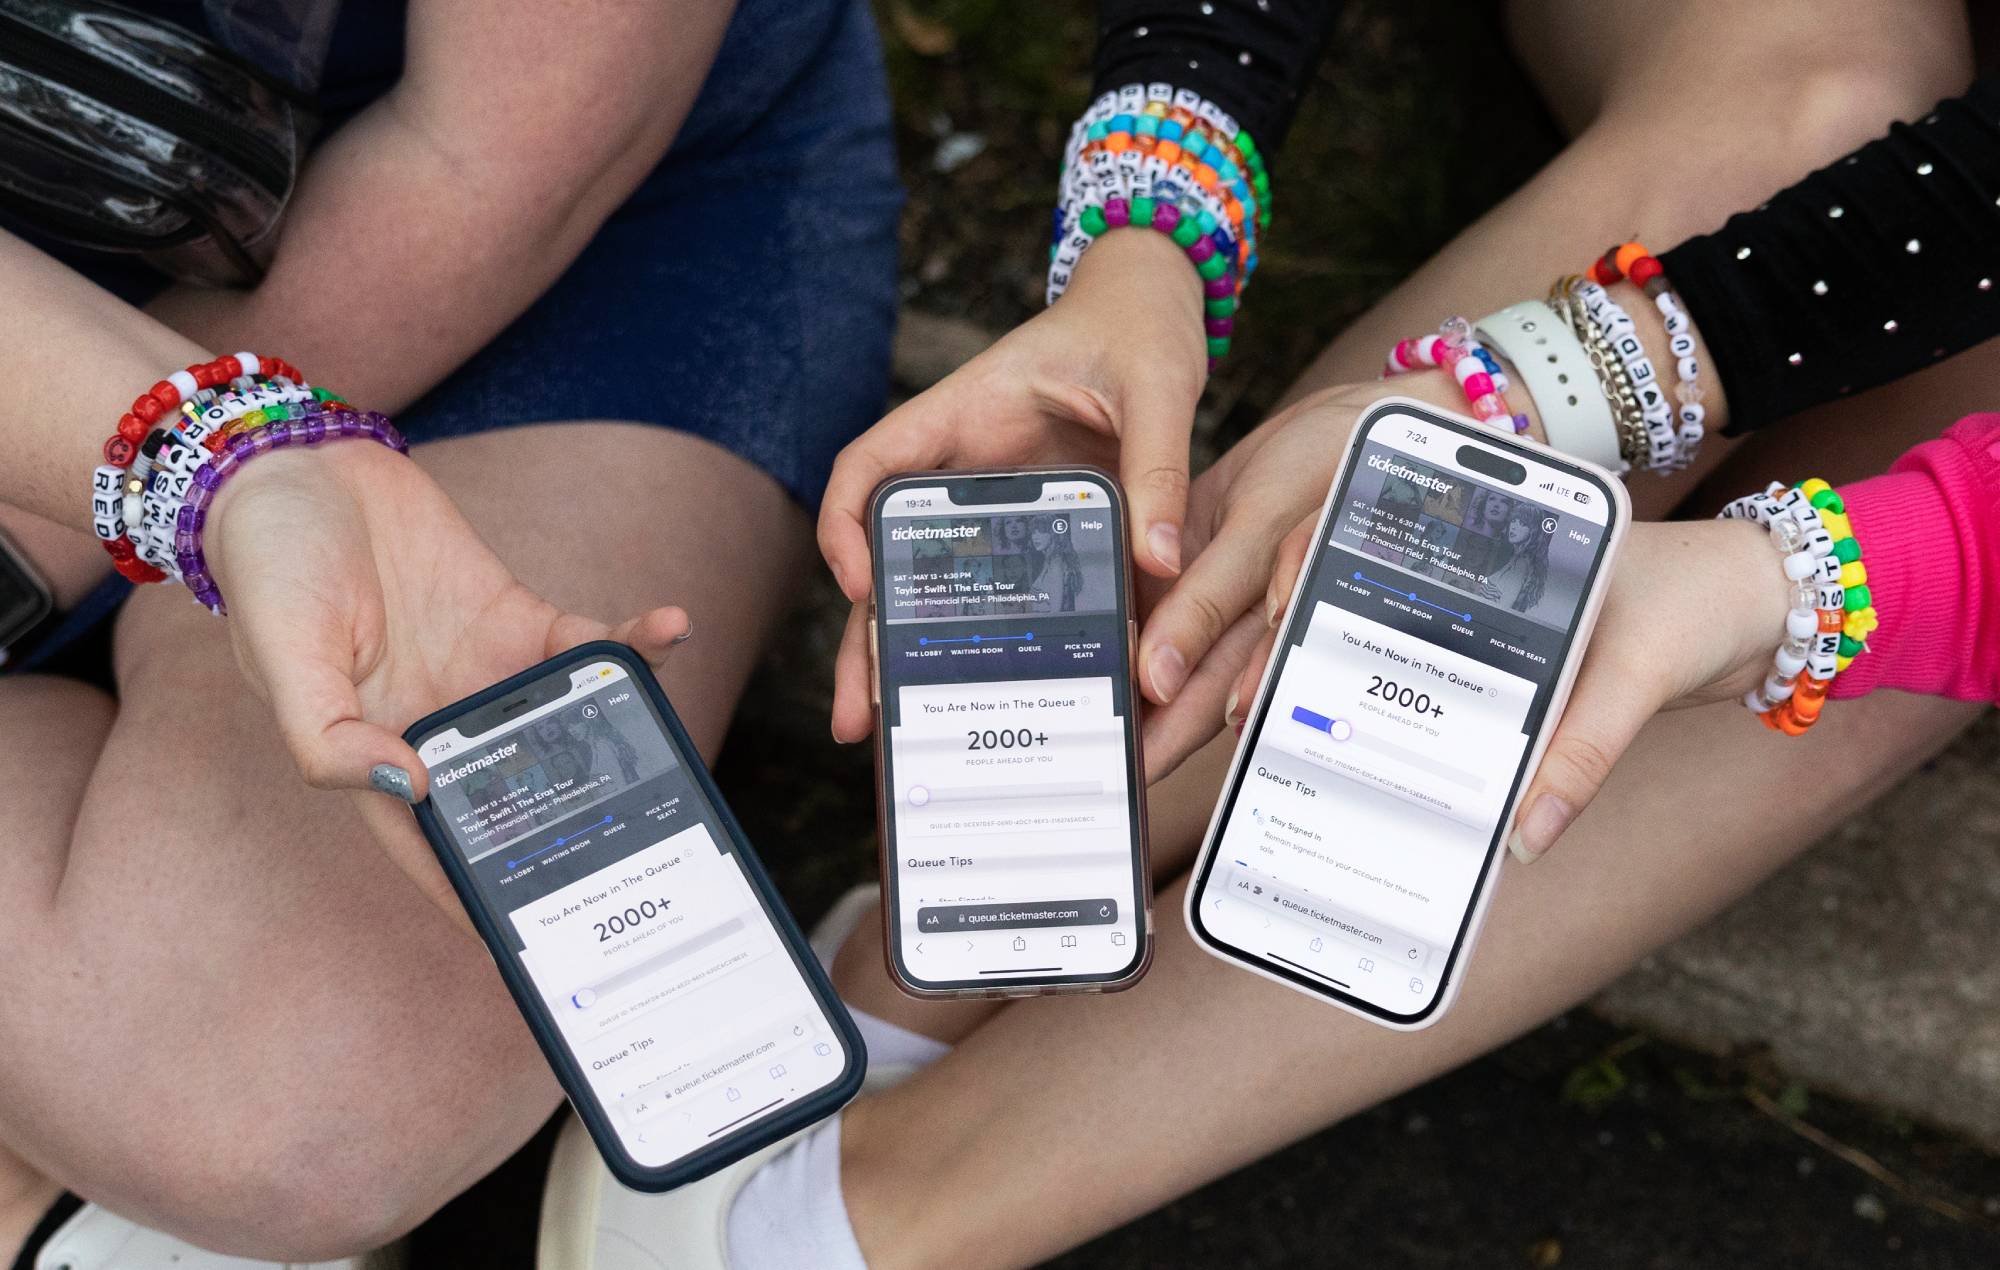 Anna Mason, Emily Lind, and Kristen Robinson show their Ticketmaster queue, which displays over 2000+ people ahead of them, from the parking lot outside of the Taylor Swift concert at Lincoln Financial Field in Philadelphia, Pennsylvania on May 13, 2023. Credit: Rachel Wisniewski/GETTY